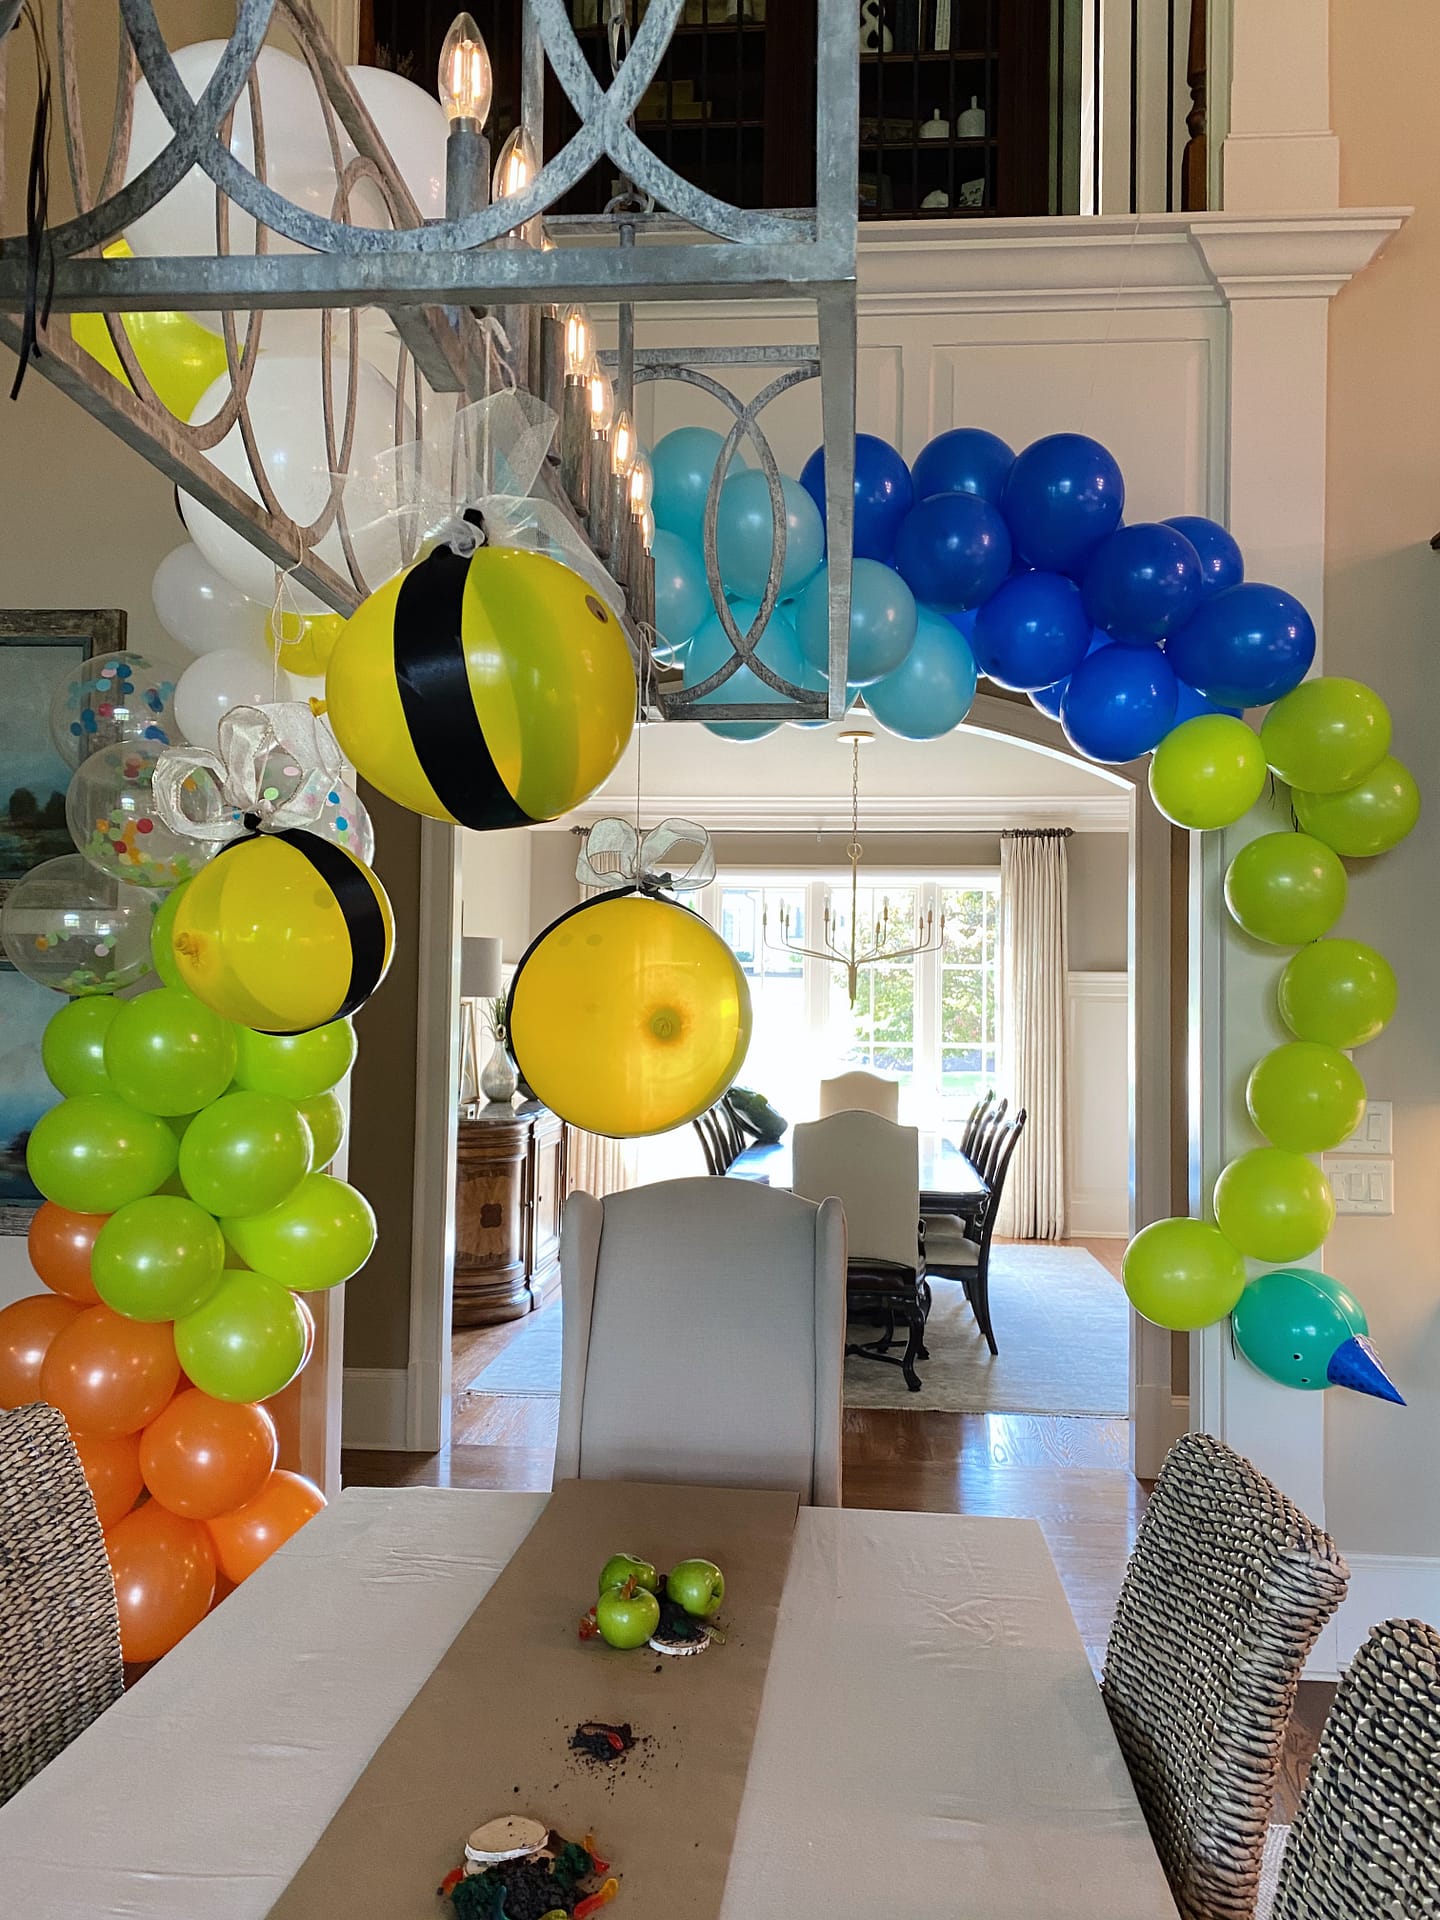 critter balloon arch with caterpillar and bees